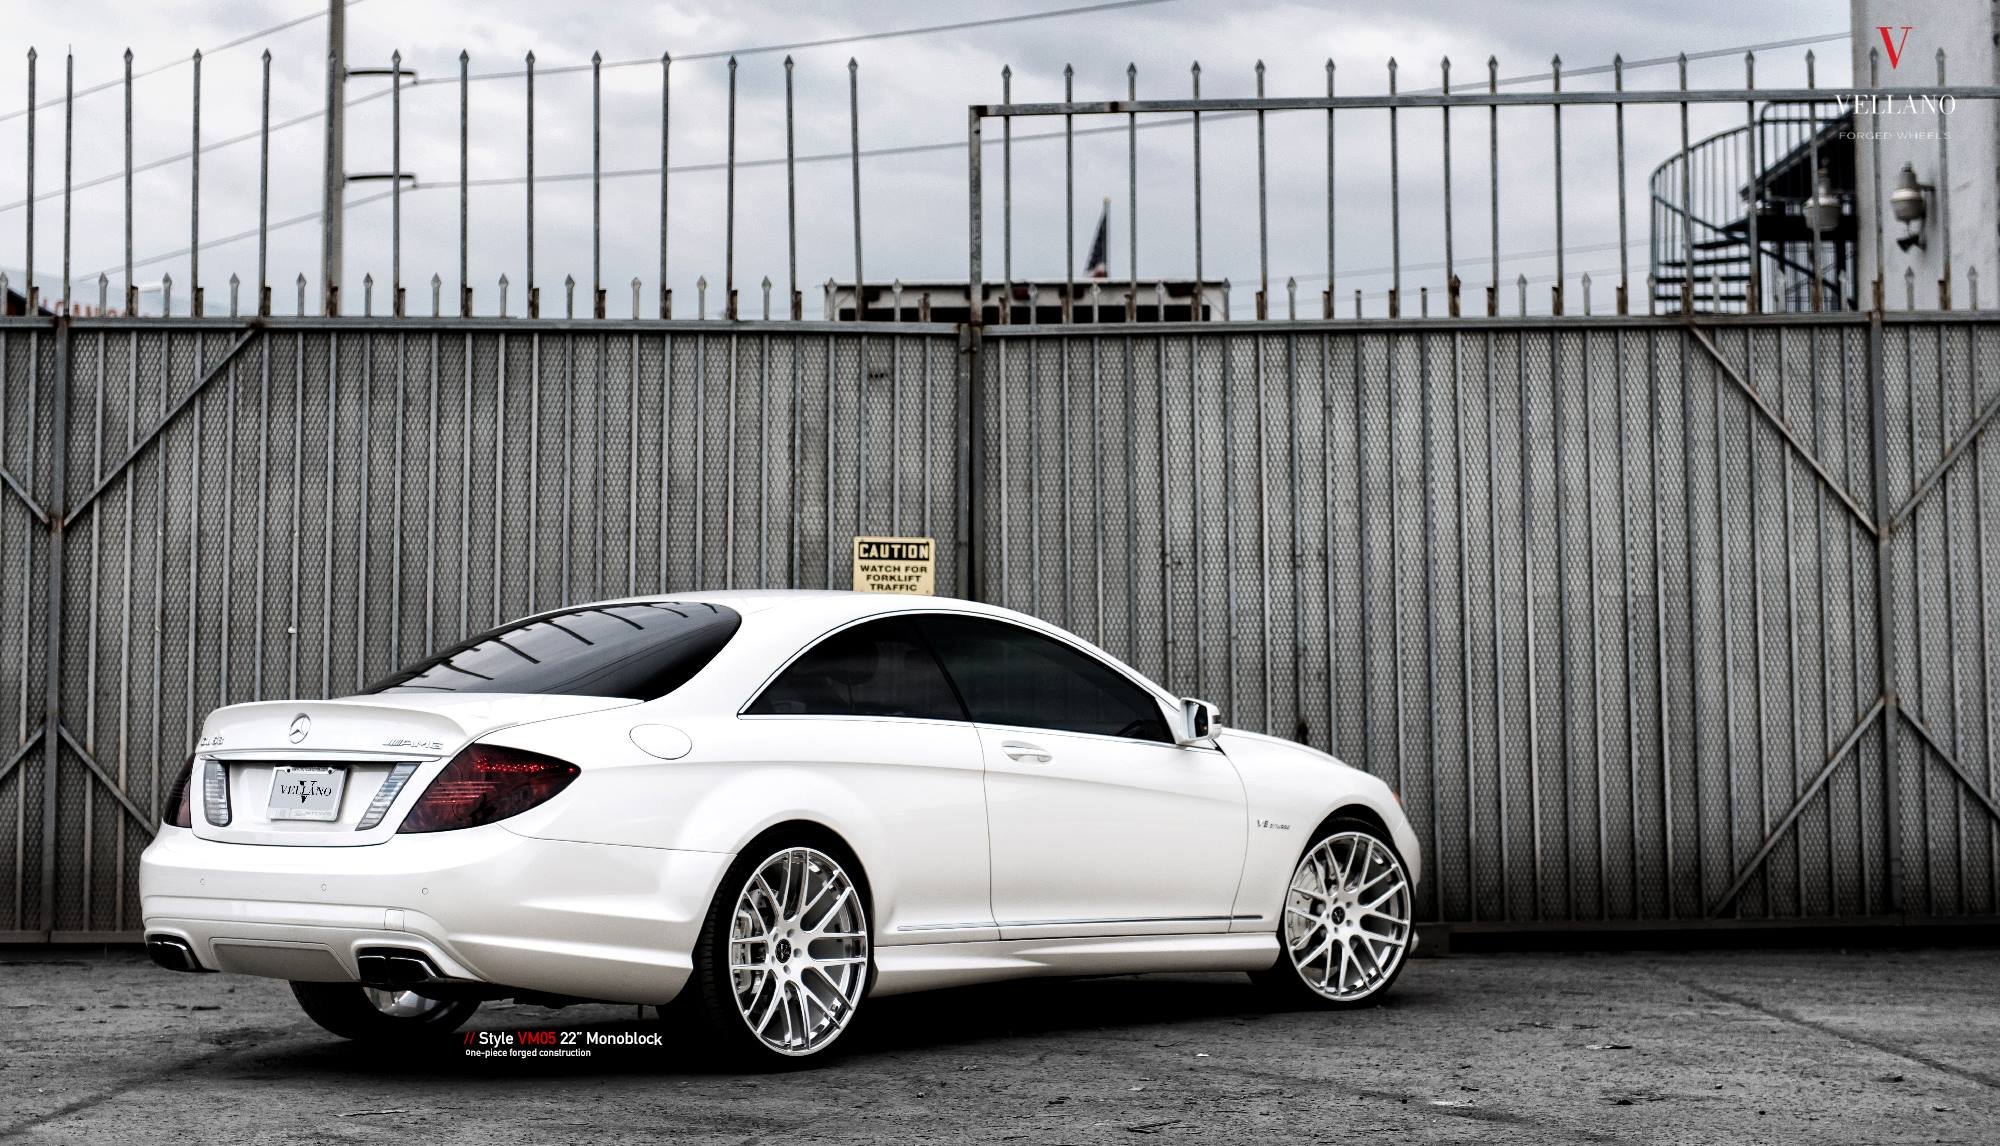 White Mercedes CL Class with Red Smoke Taillights - Photo by Vellano